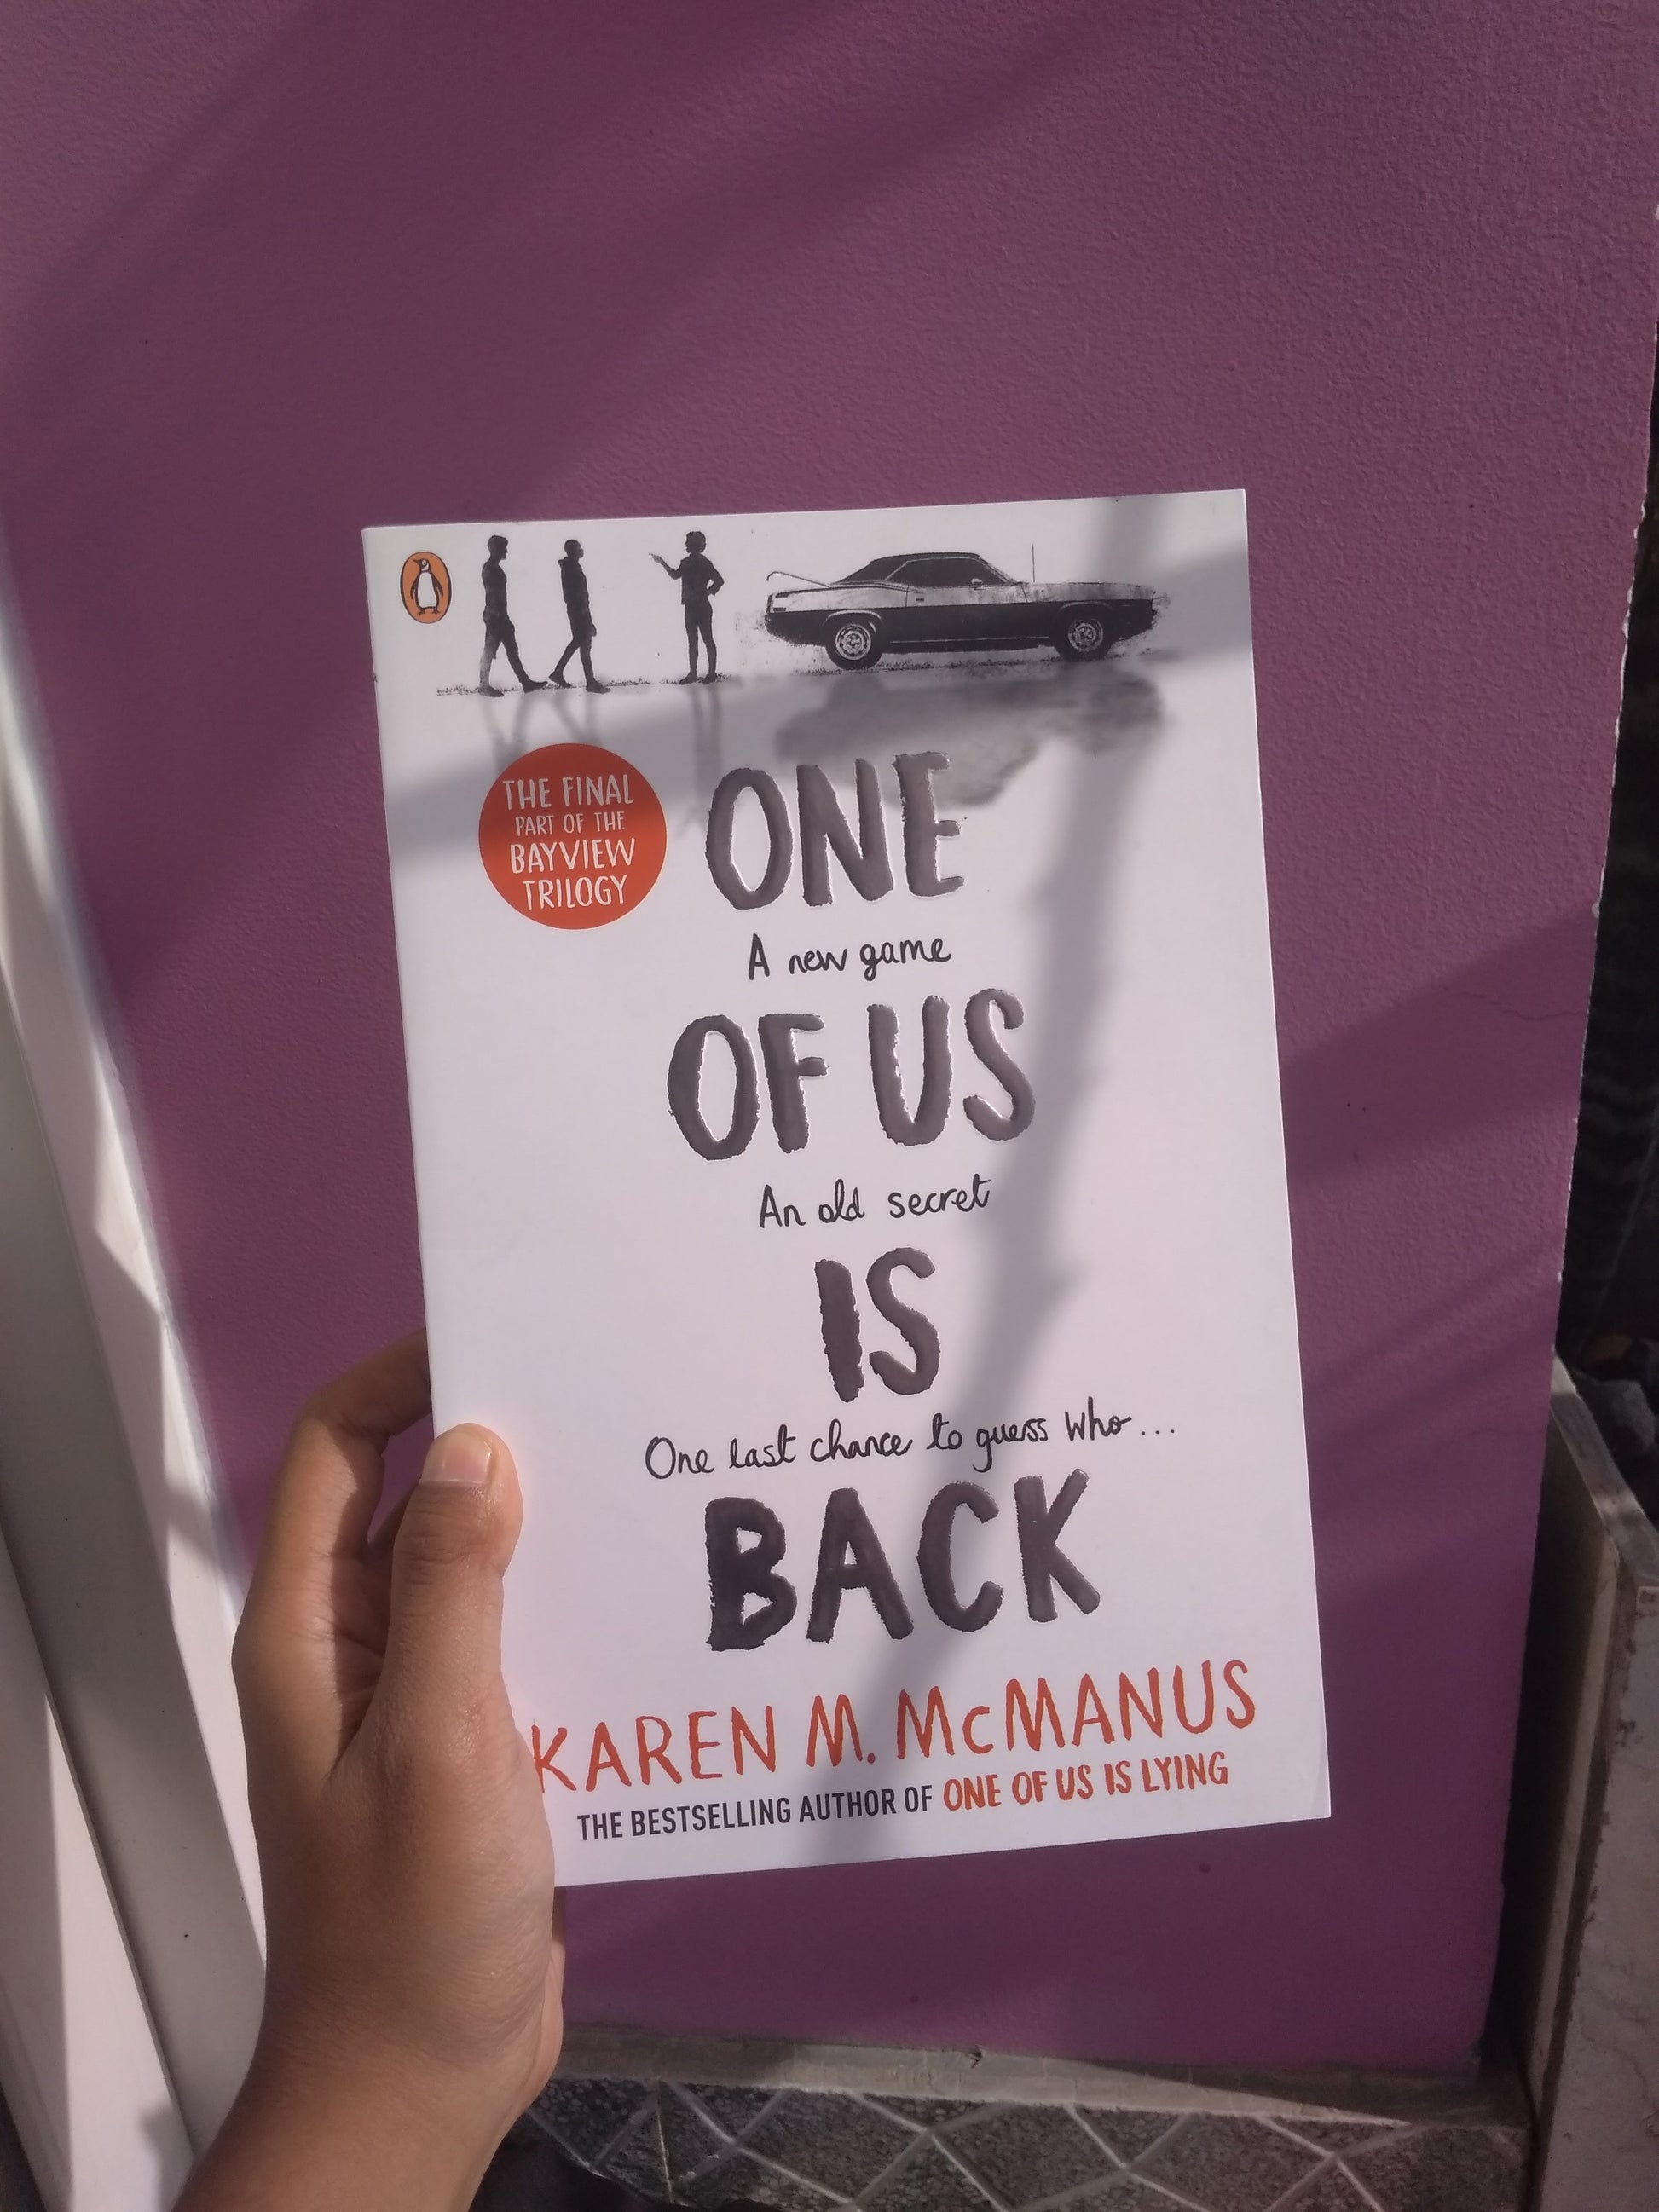 One of Us is Back by Karen M. McManus at BIBLIONEPAL Bookstore